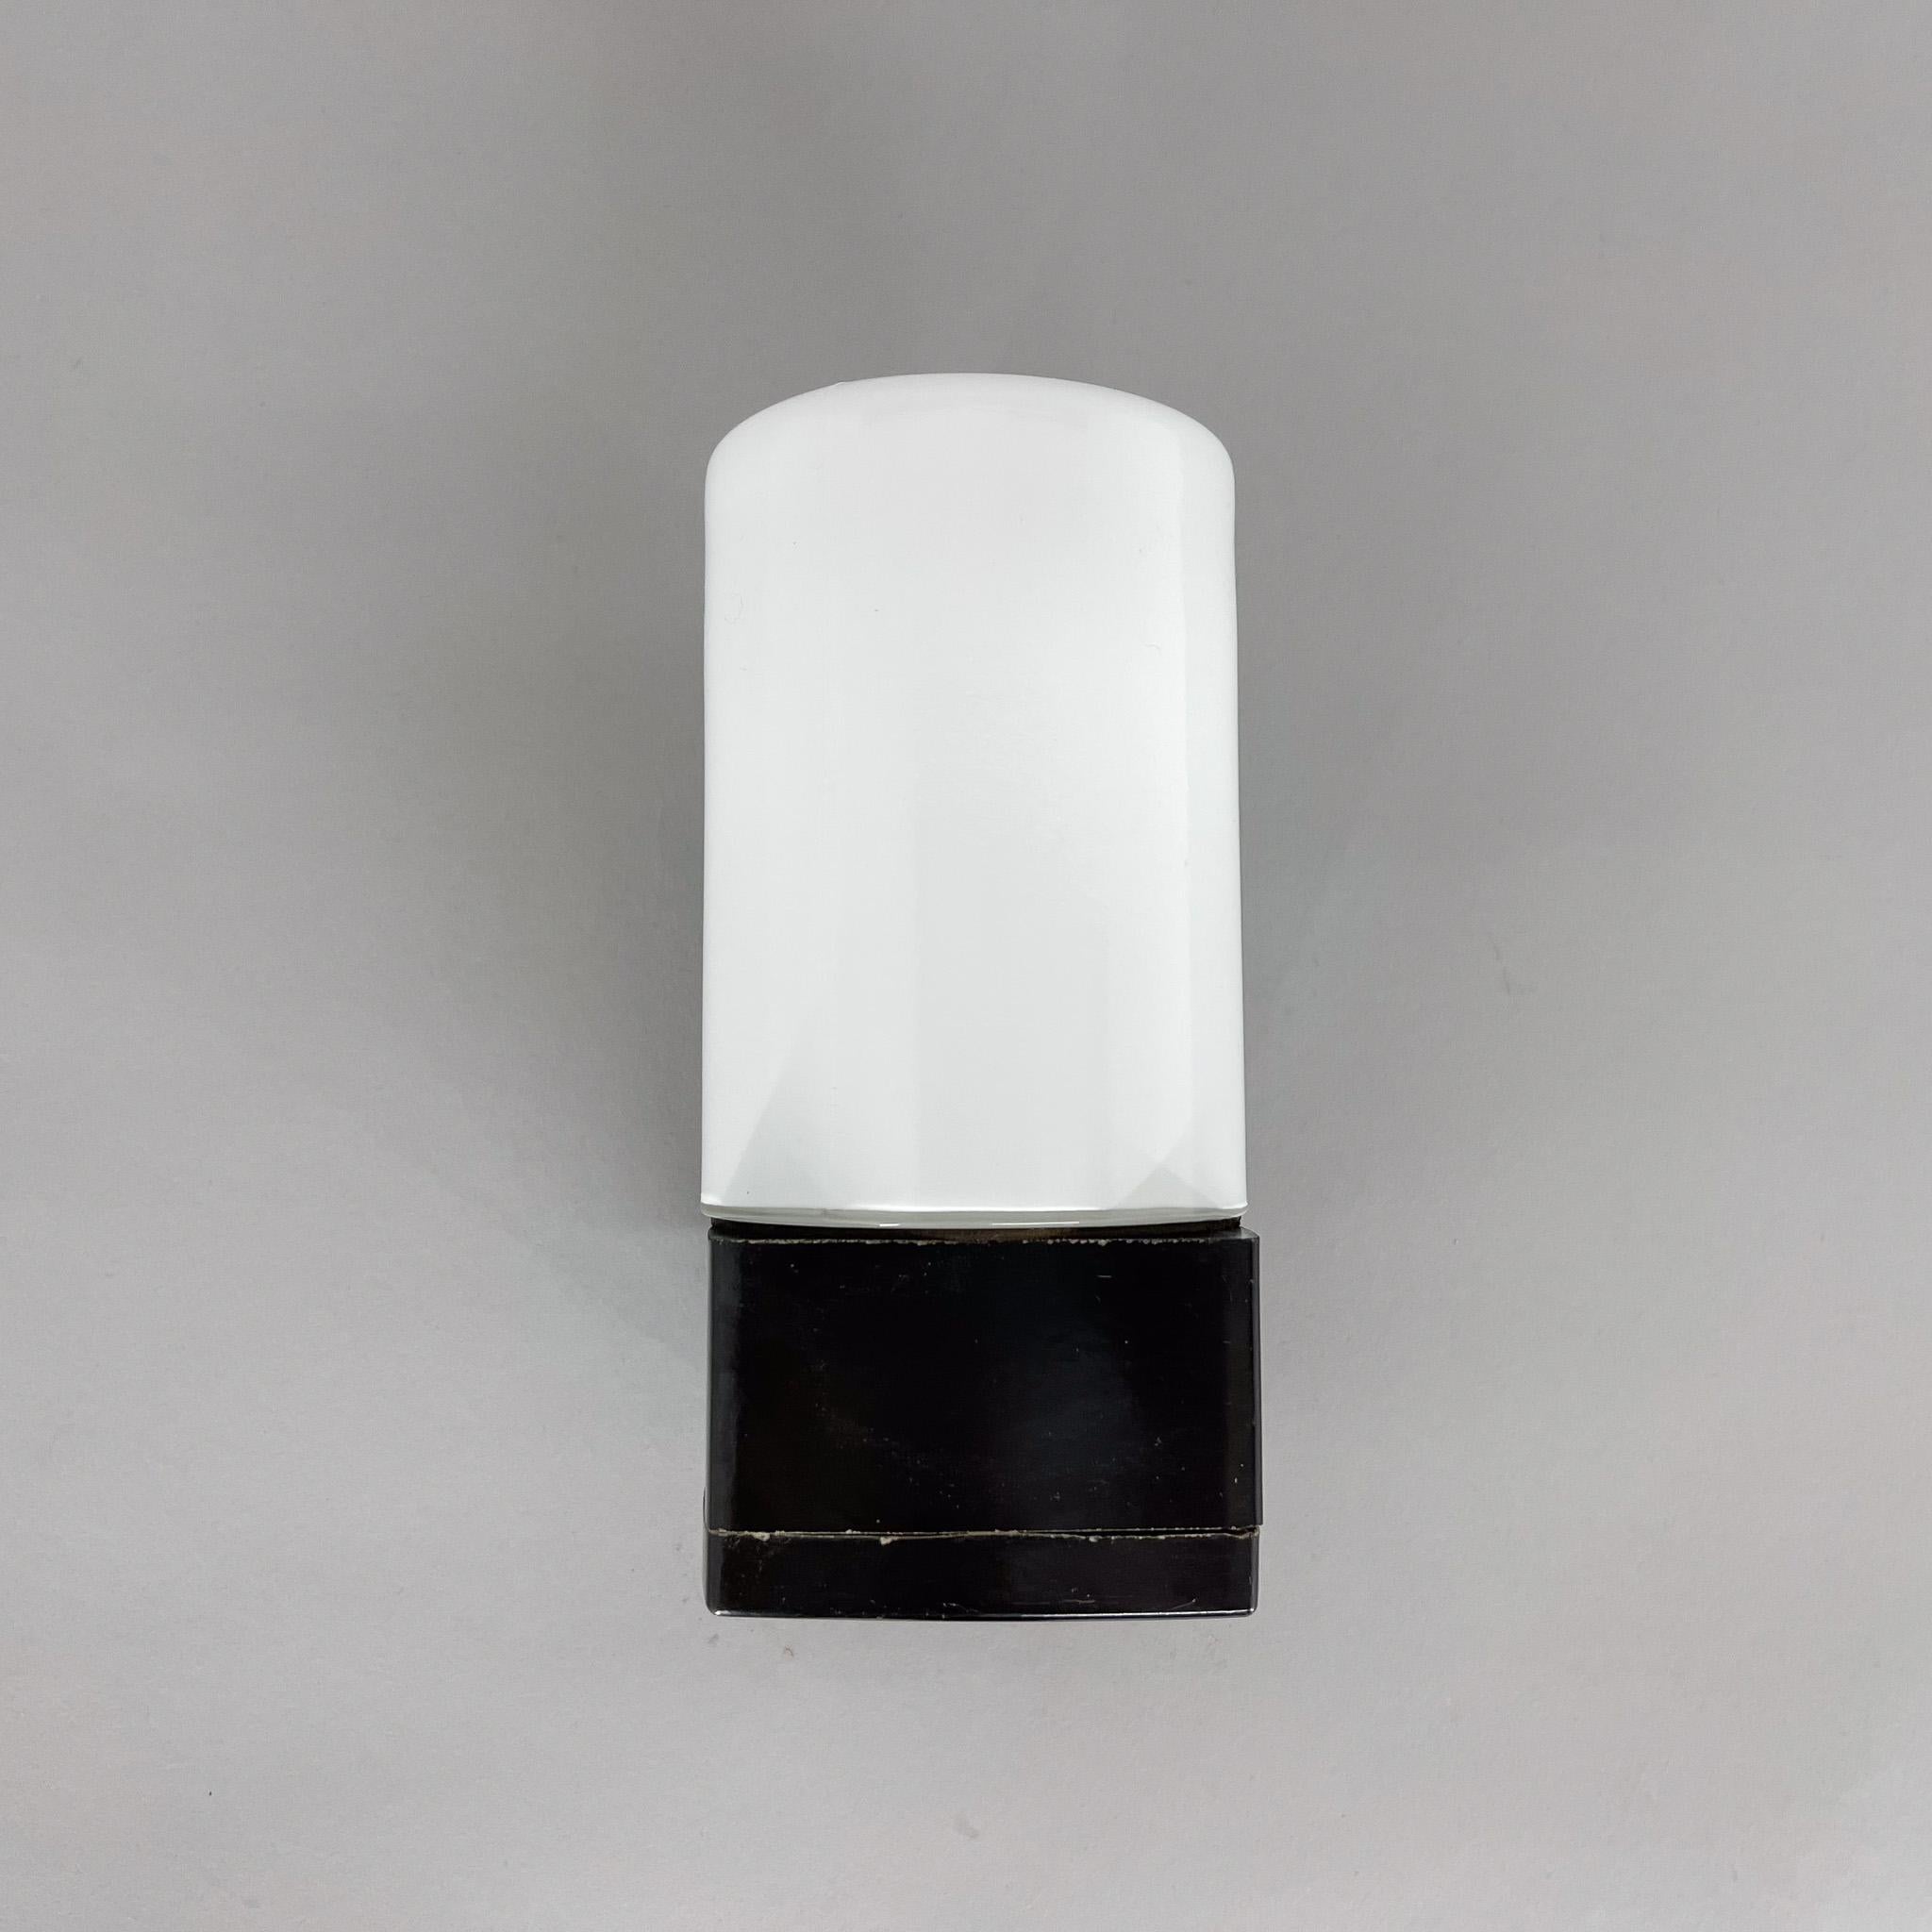 Designed in the 1960s in former Czechoslovakia. Bakelite holder and opal glass shade. Seal rubber against moisture. Bulbs E14-E15, 2x40W US compatible cable.